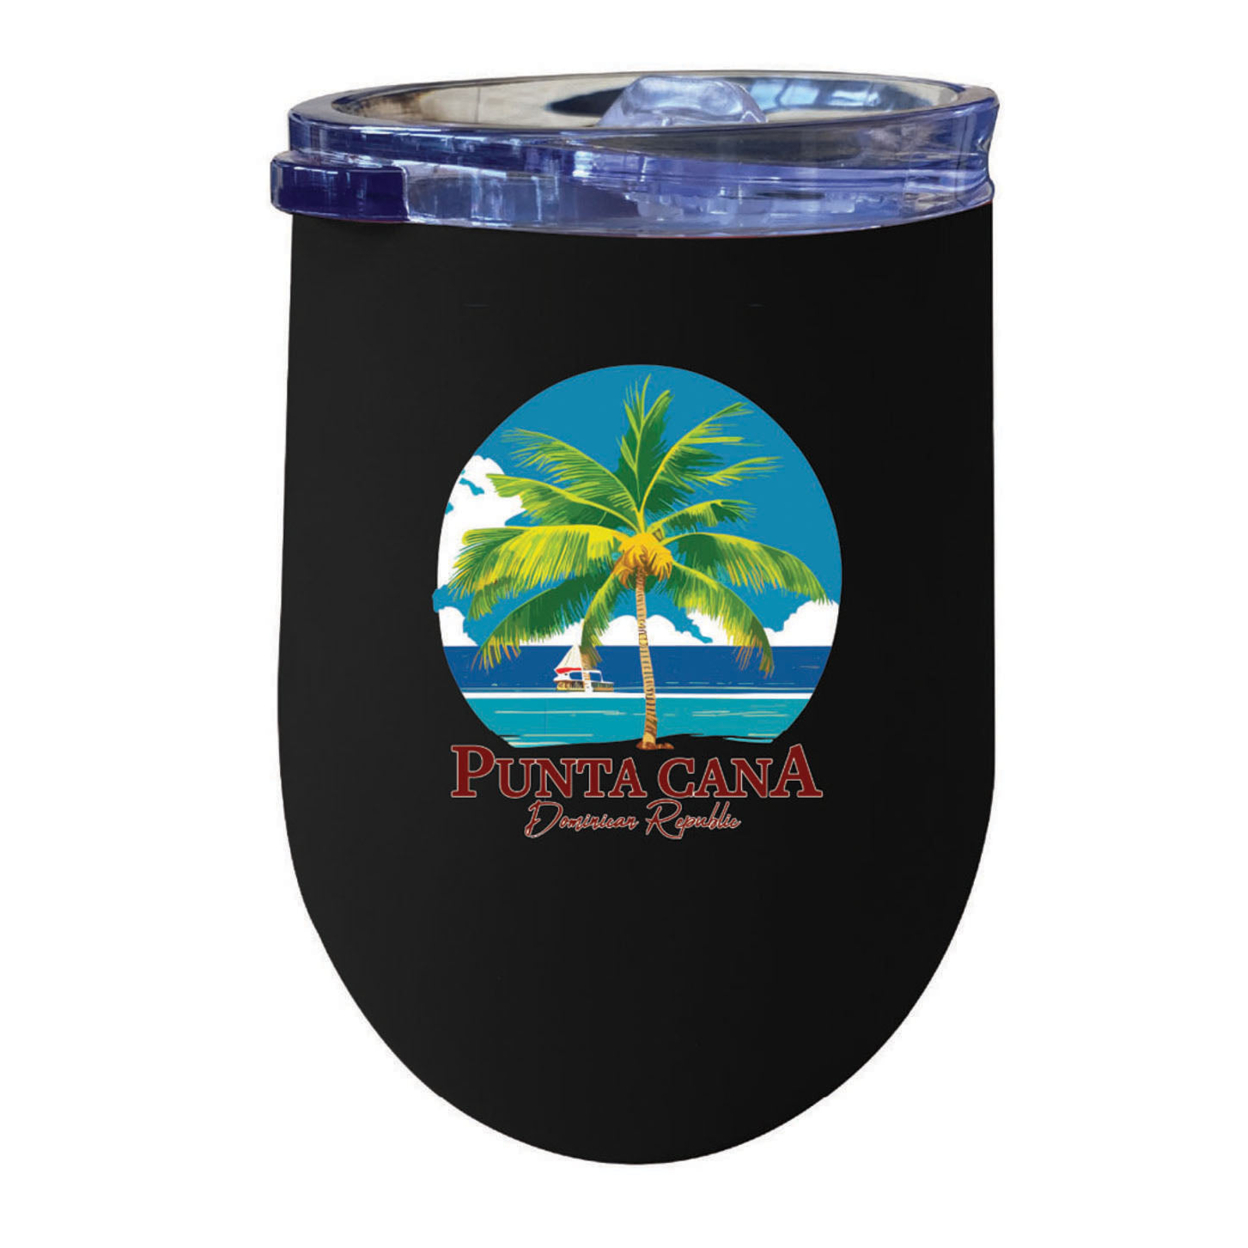 Punta Cana Dominican Republic Souvenir 12 Oz Insulated Wine Stainless Steel Tumbler - Black, PALM